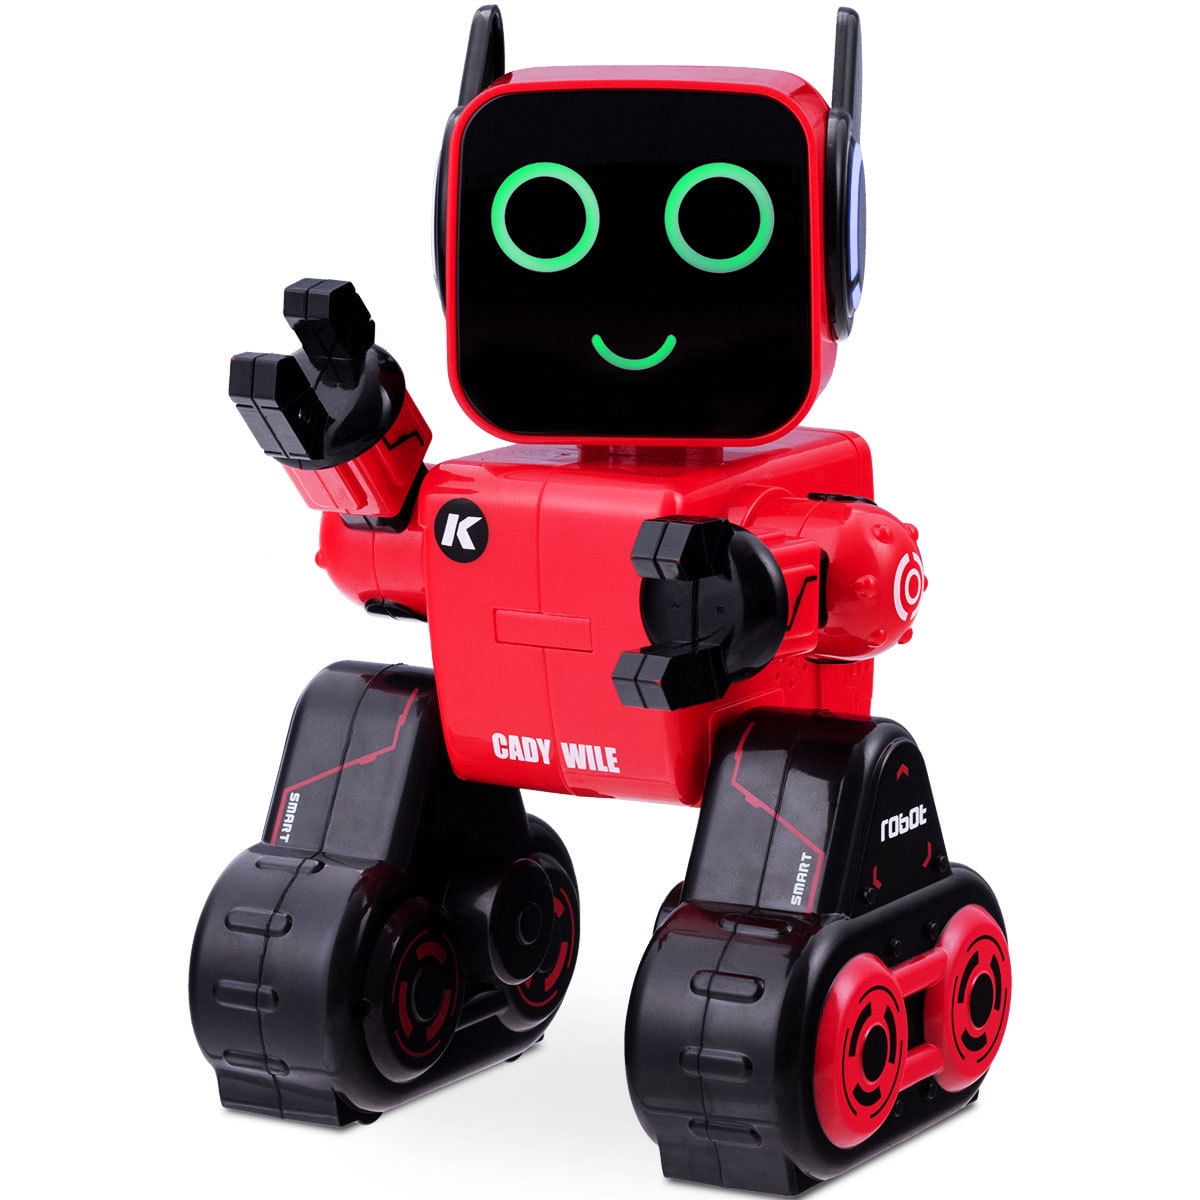 K3 Smart RC Robot Toys for Kids Programmable Touch/Sound Control Piggy Bank 